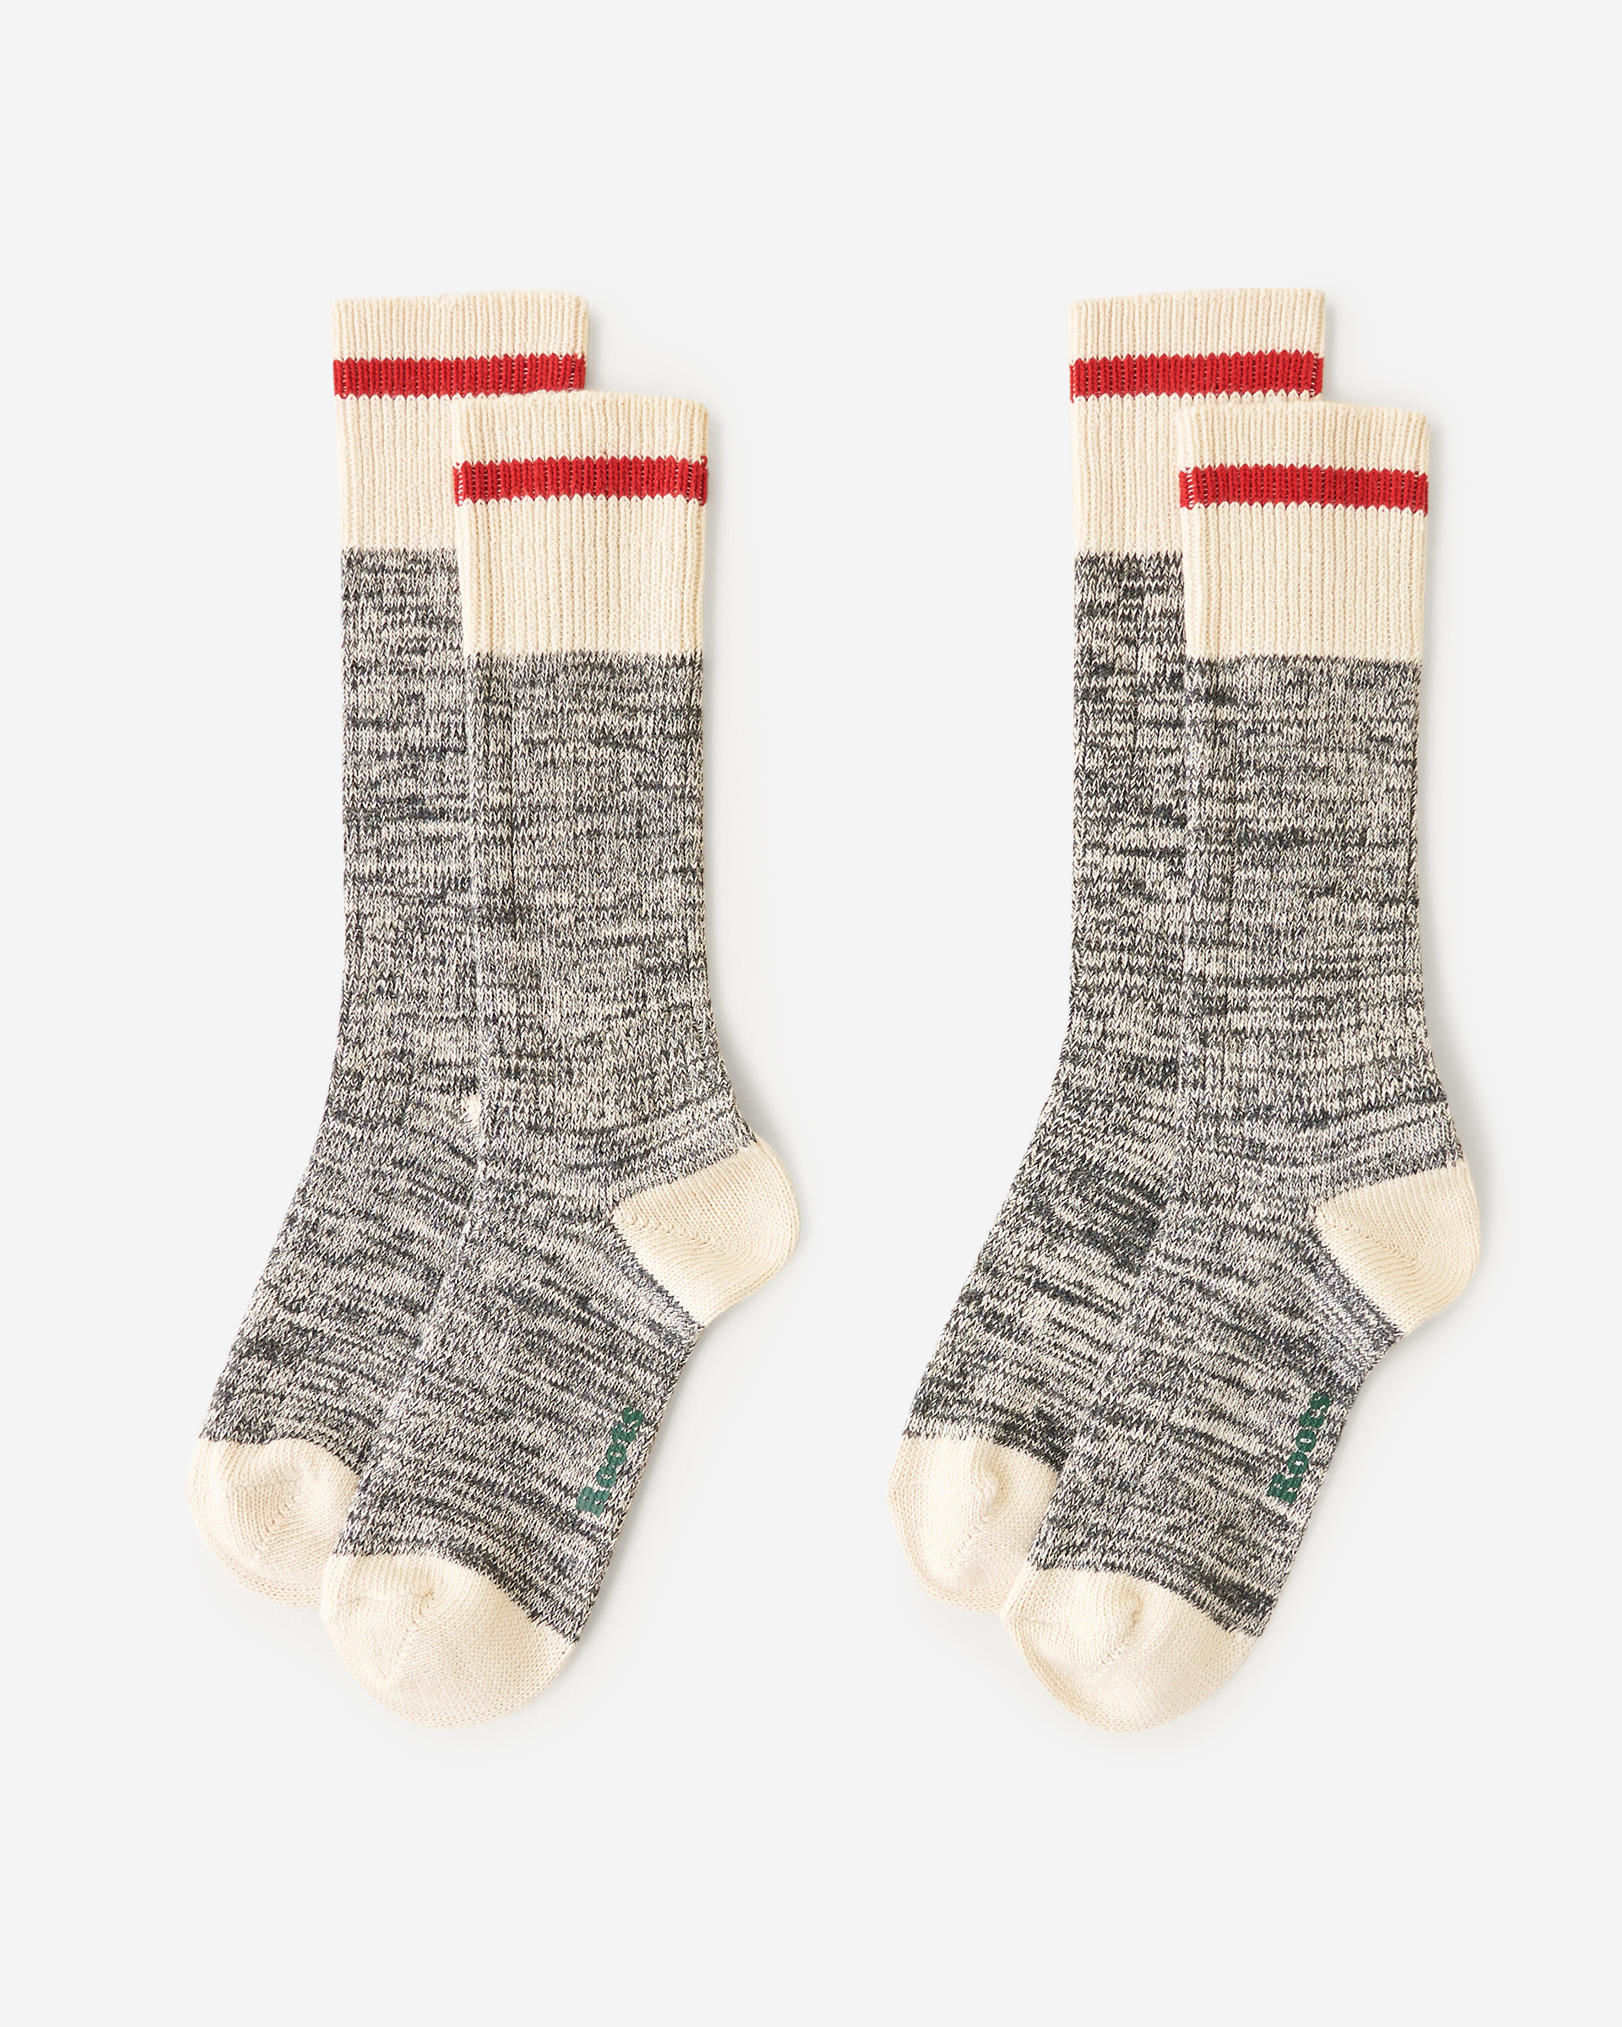 Roots Adult Classic Cotton Cabin Sock 2 Pack in Salt/Pepper